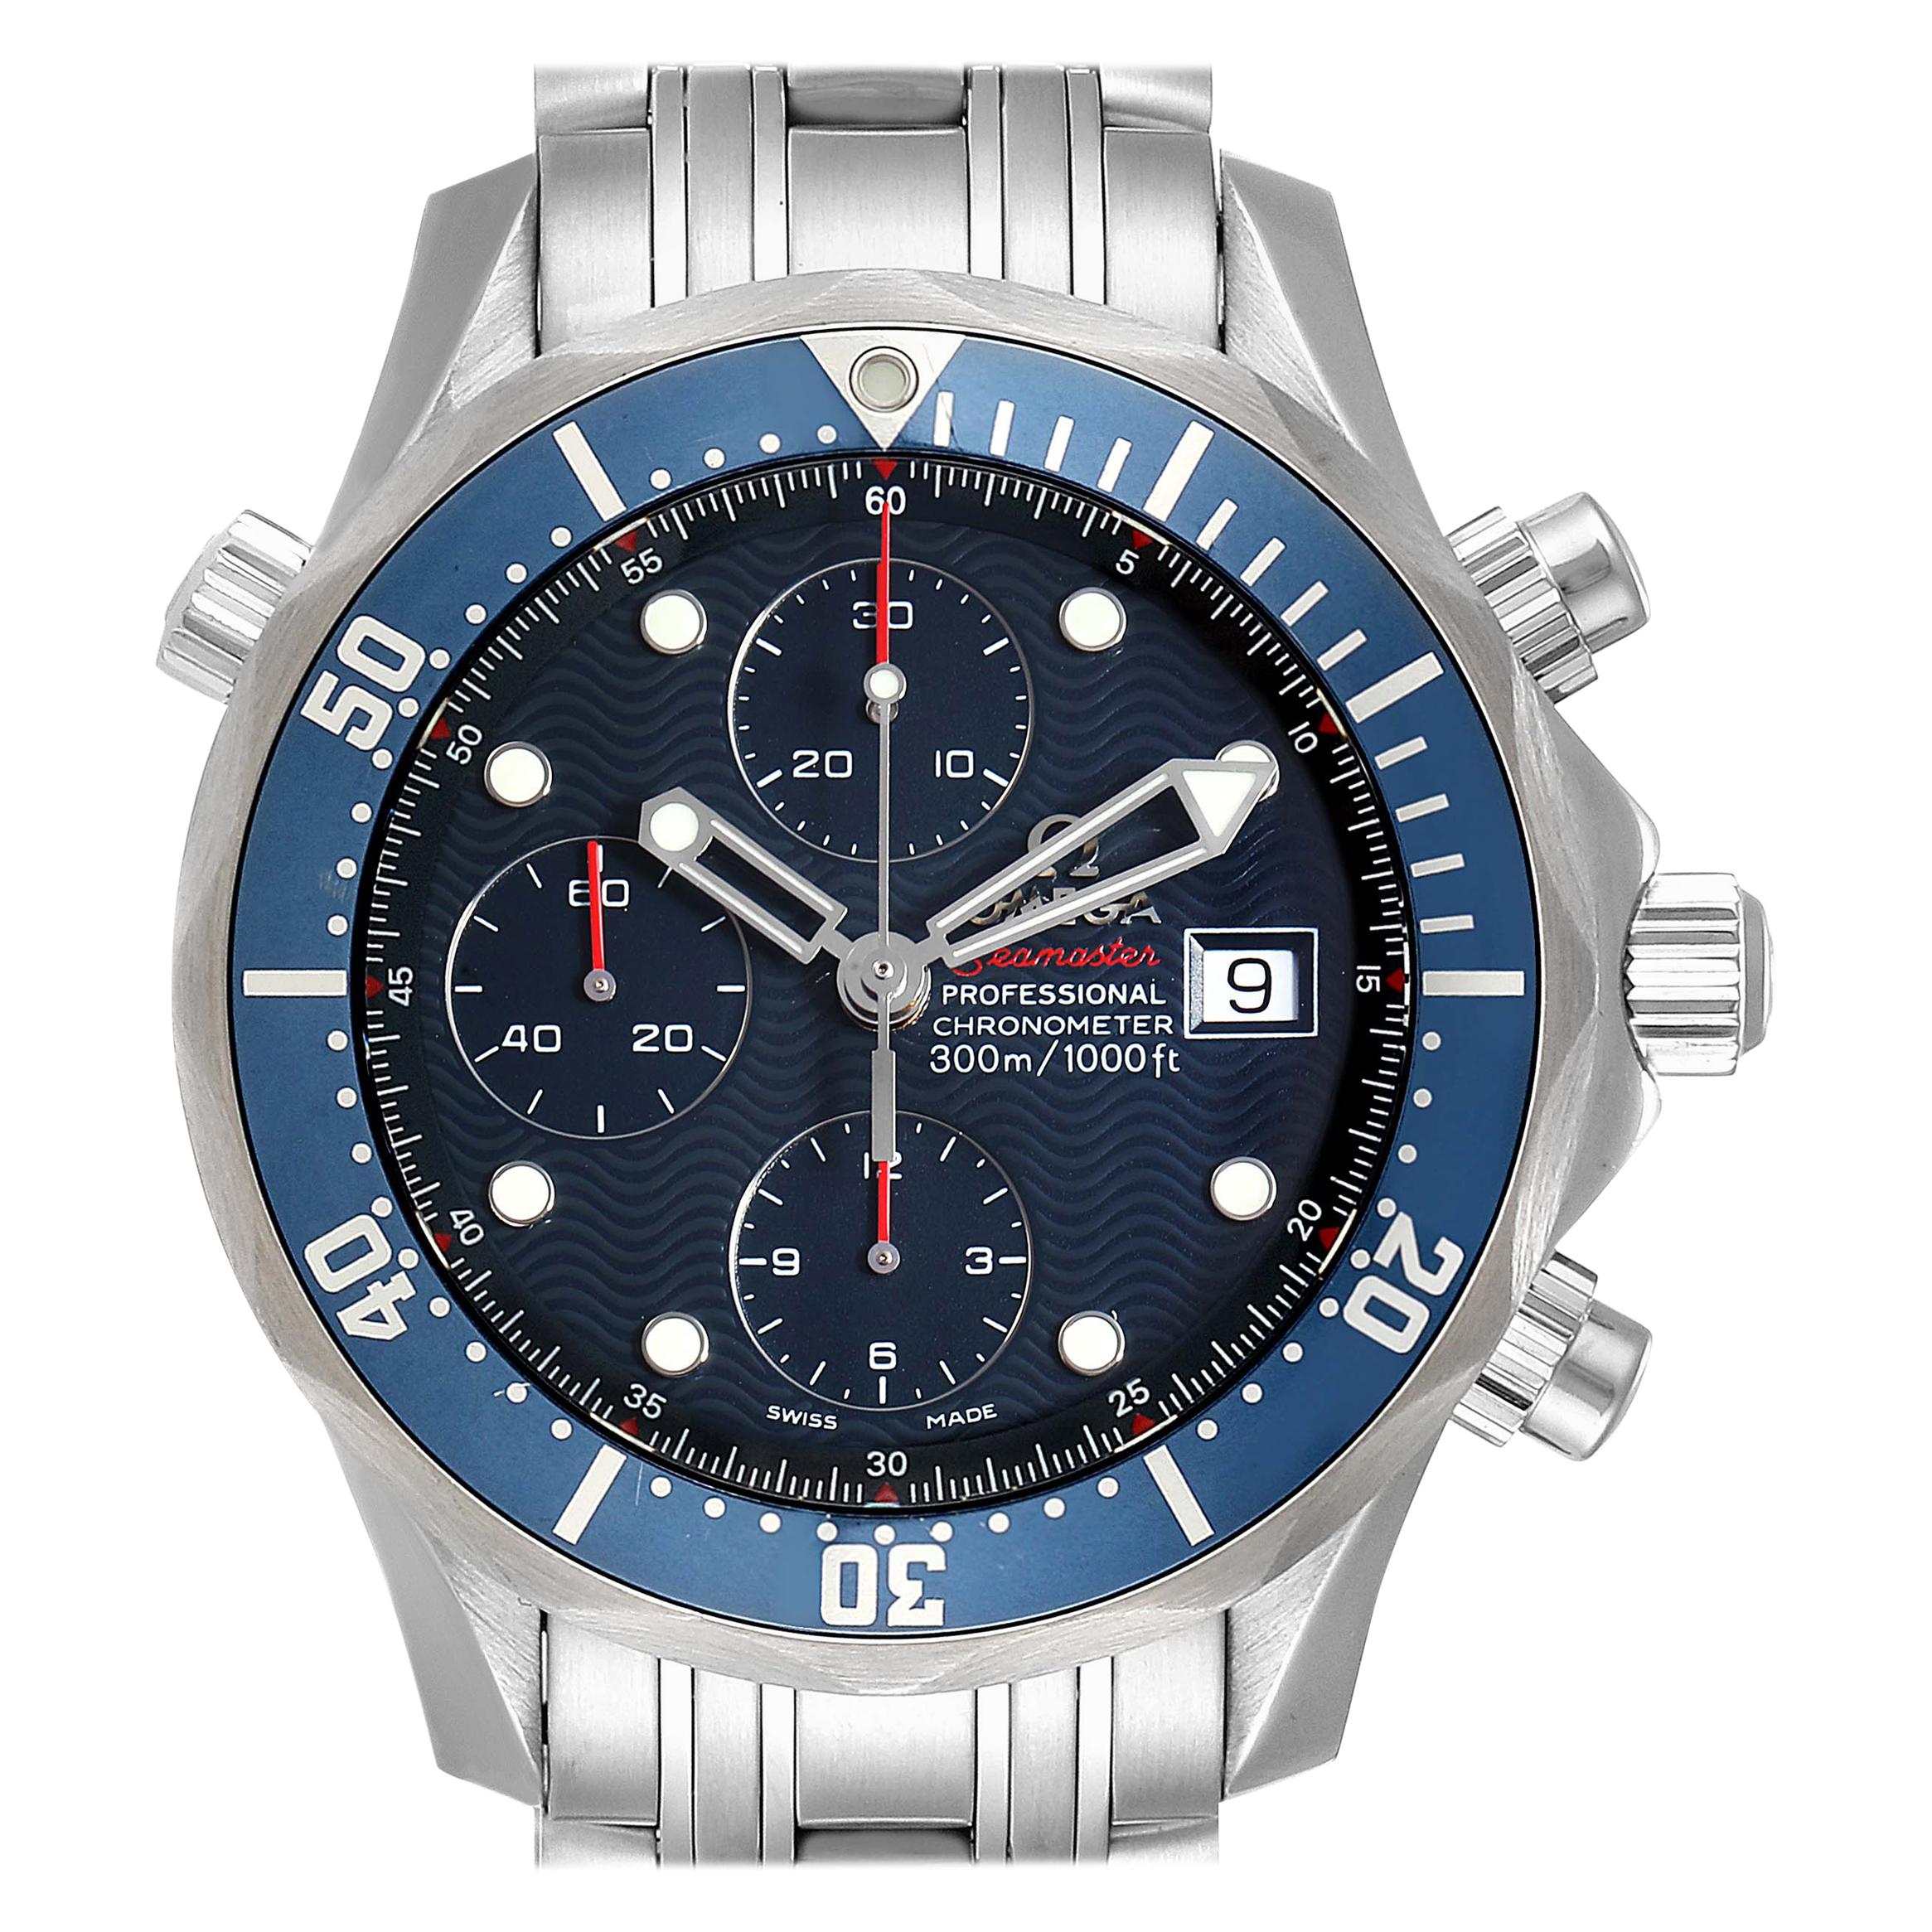 Omega Seamaster 300 Chronograph Men's Watch 2225.80.00 Box Card For Sale